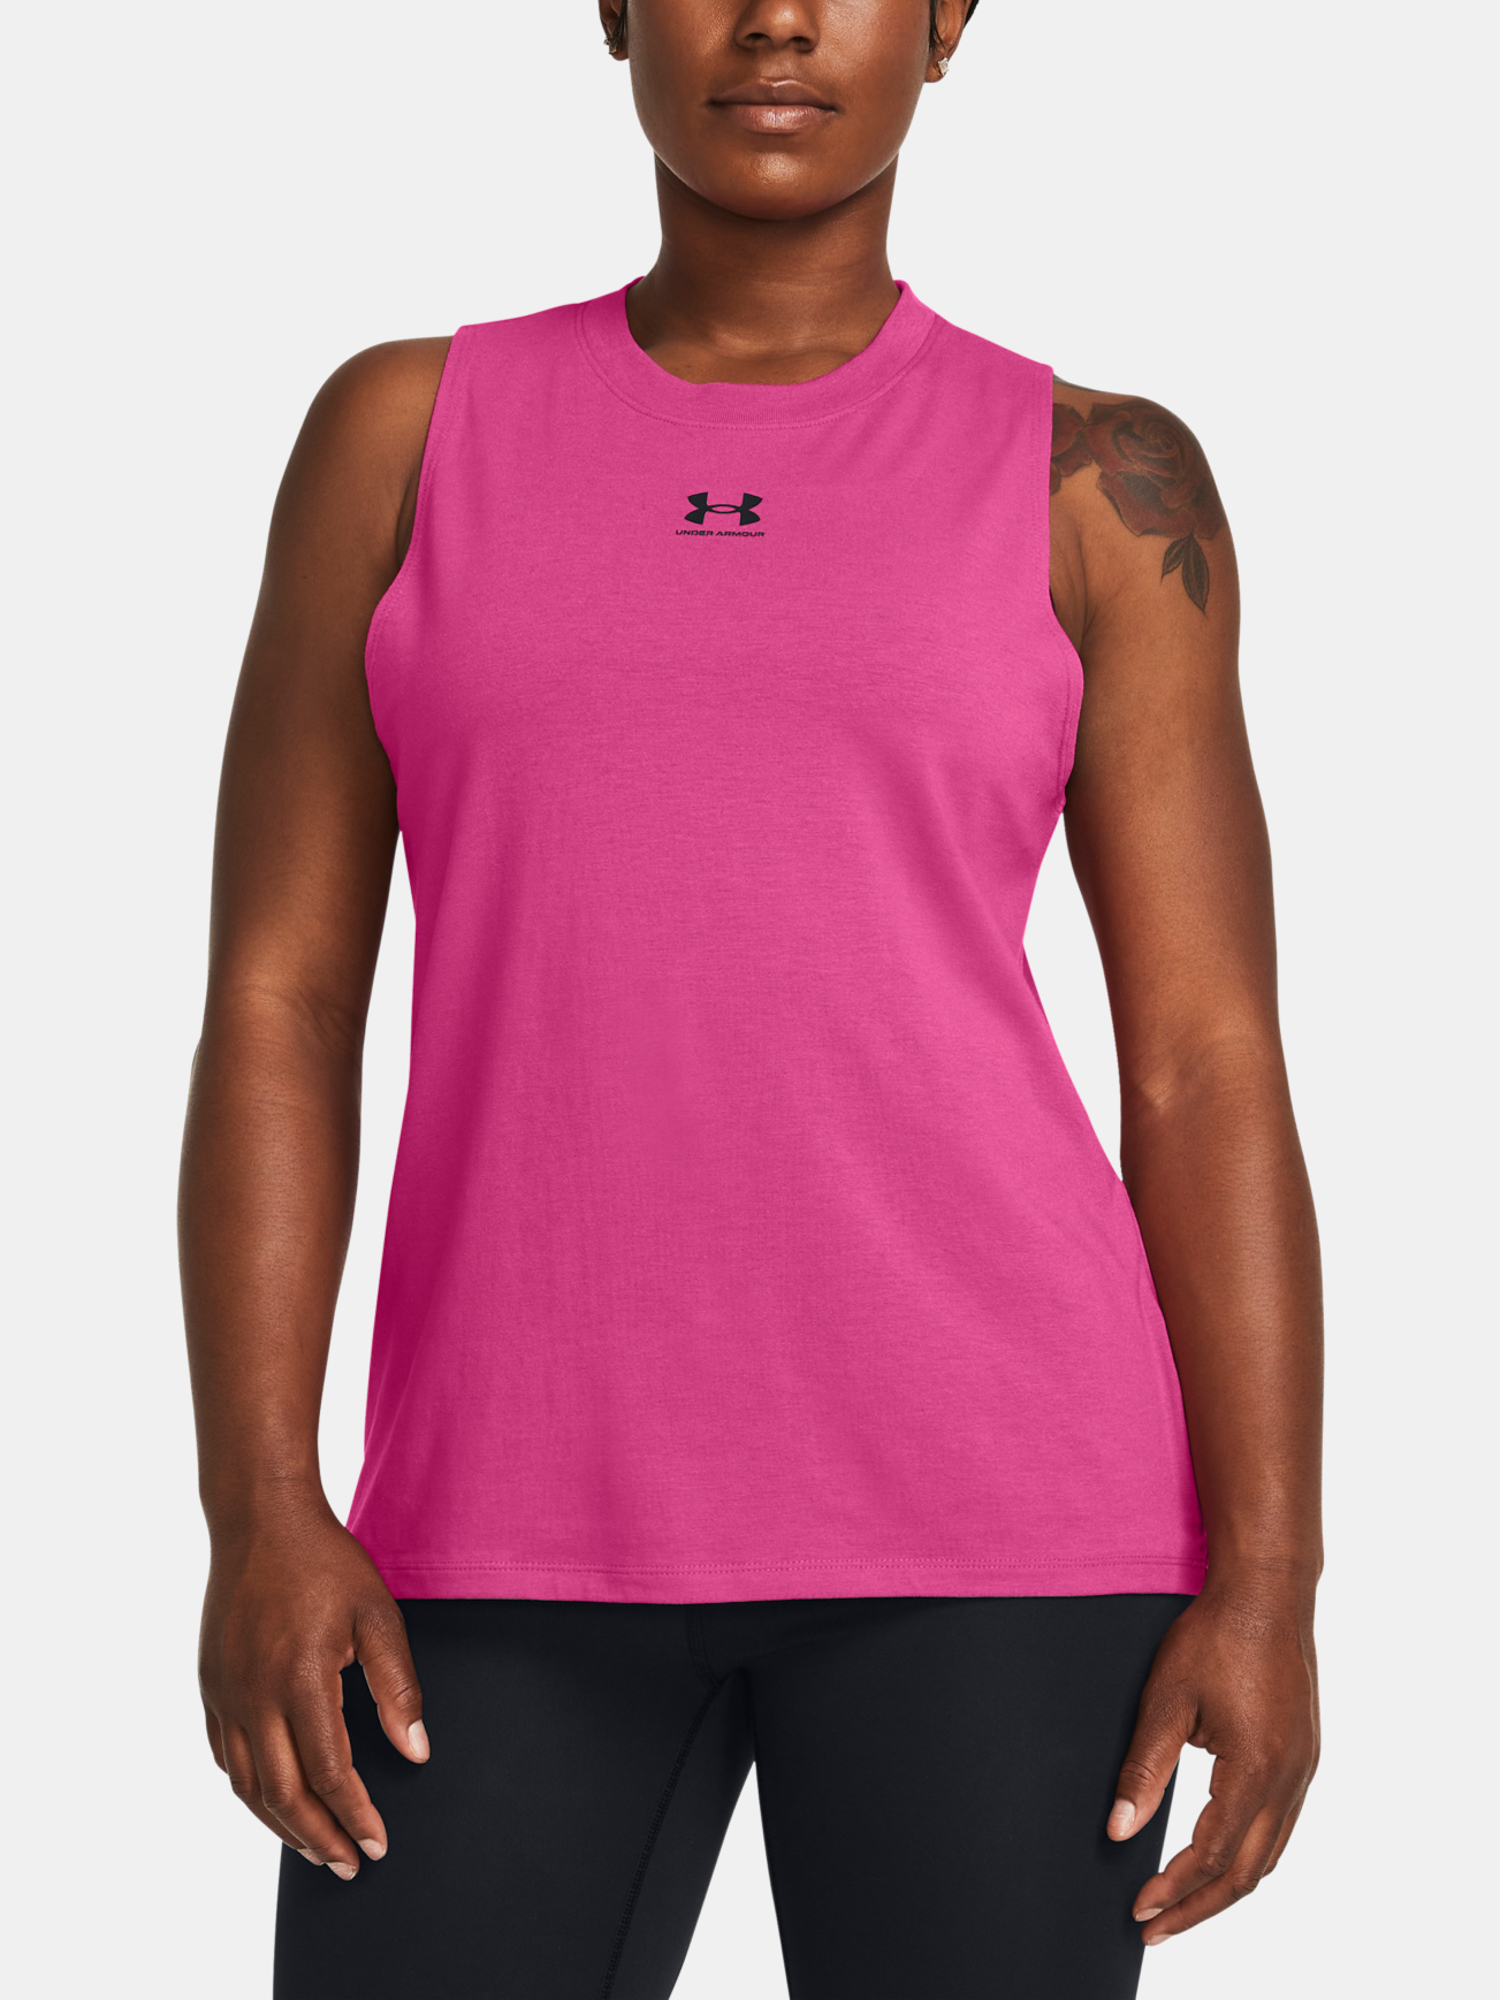 Under Armour Campus Muscle Tank Top - PNK - Women